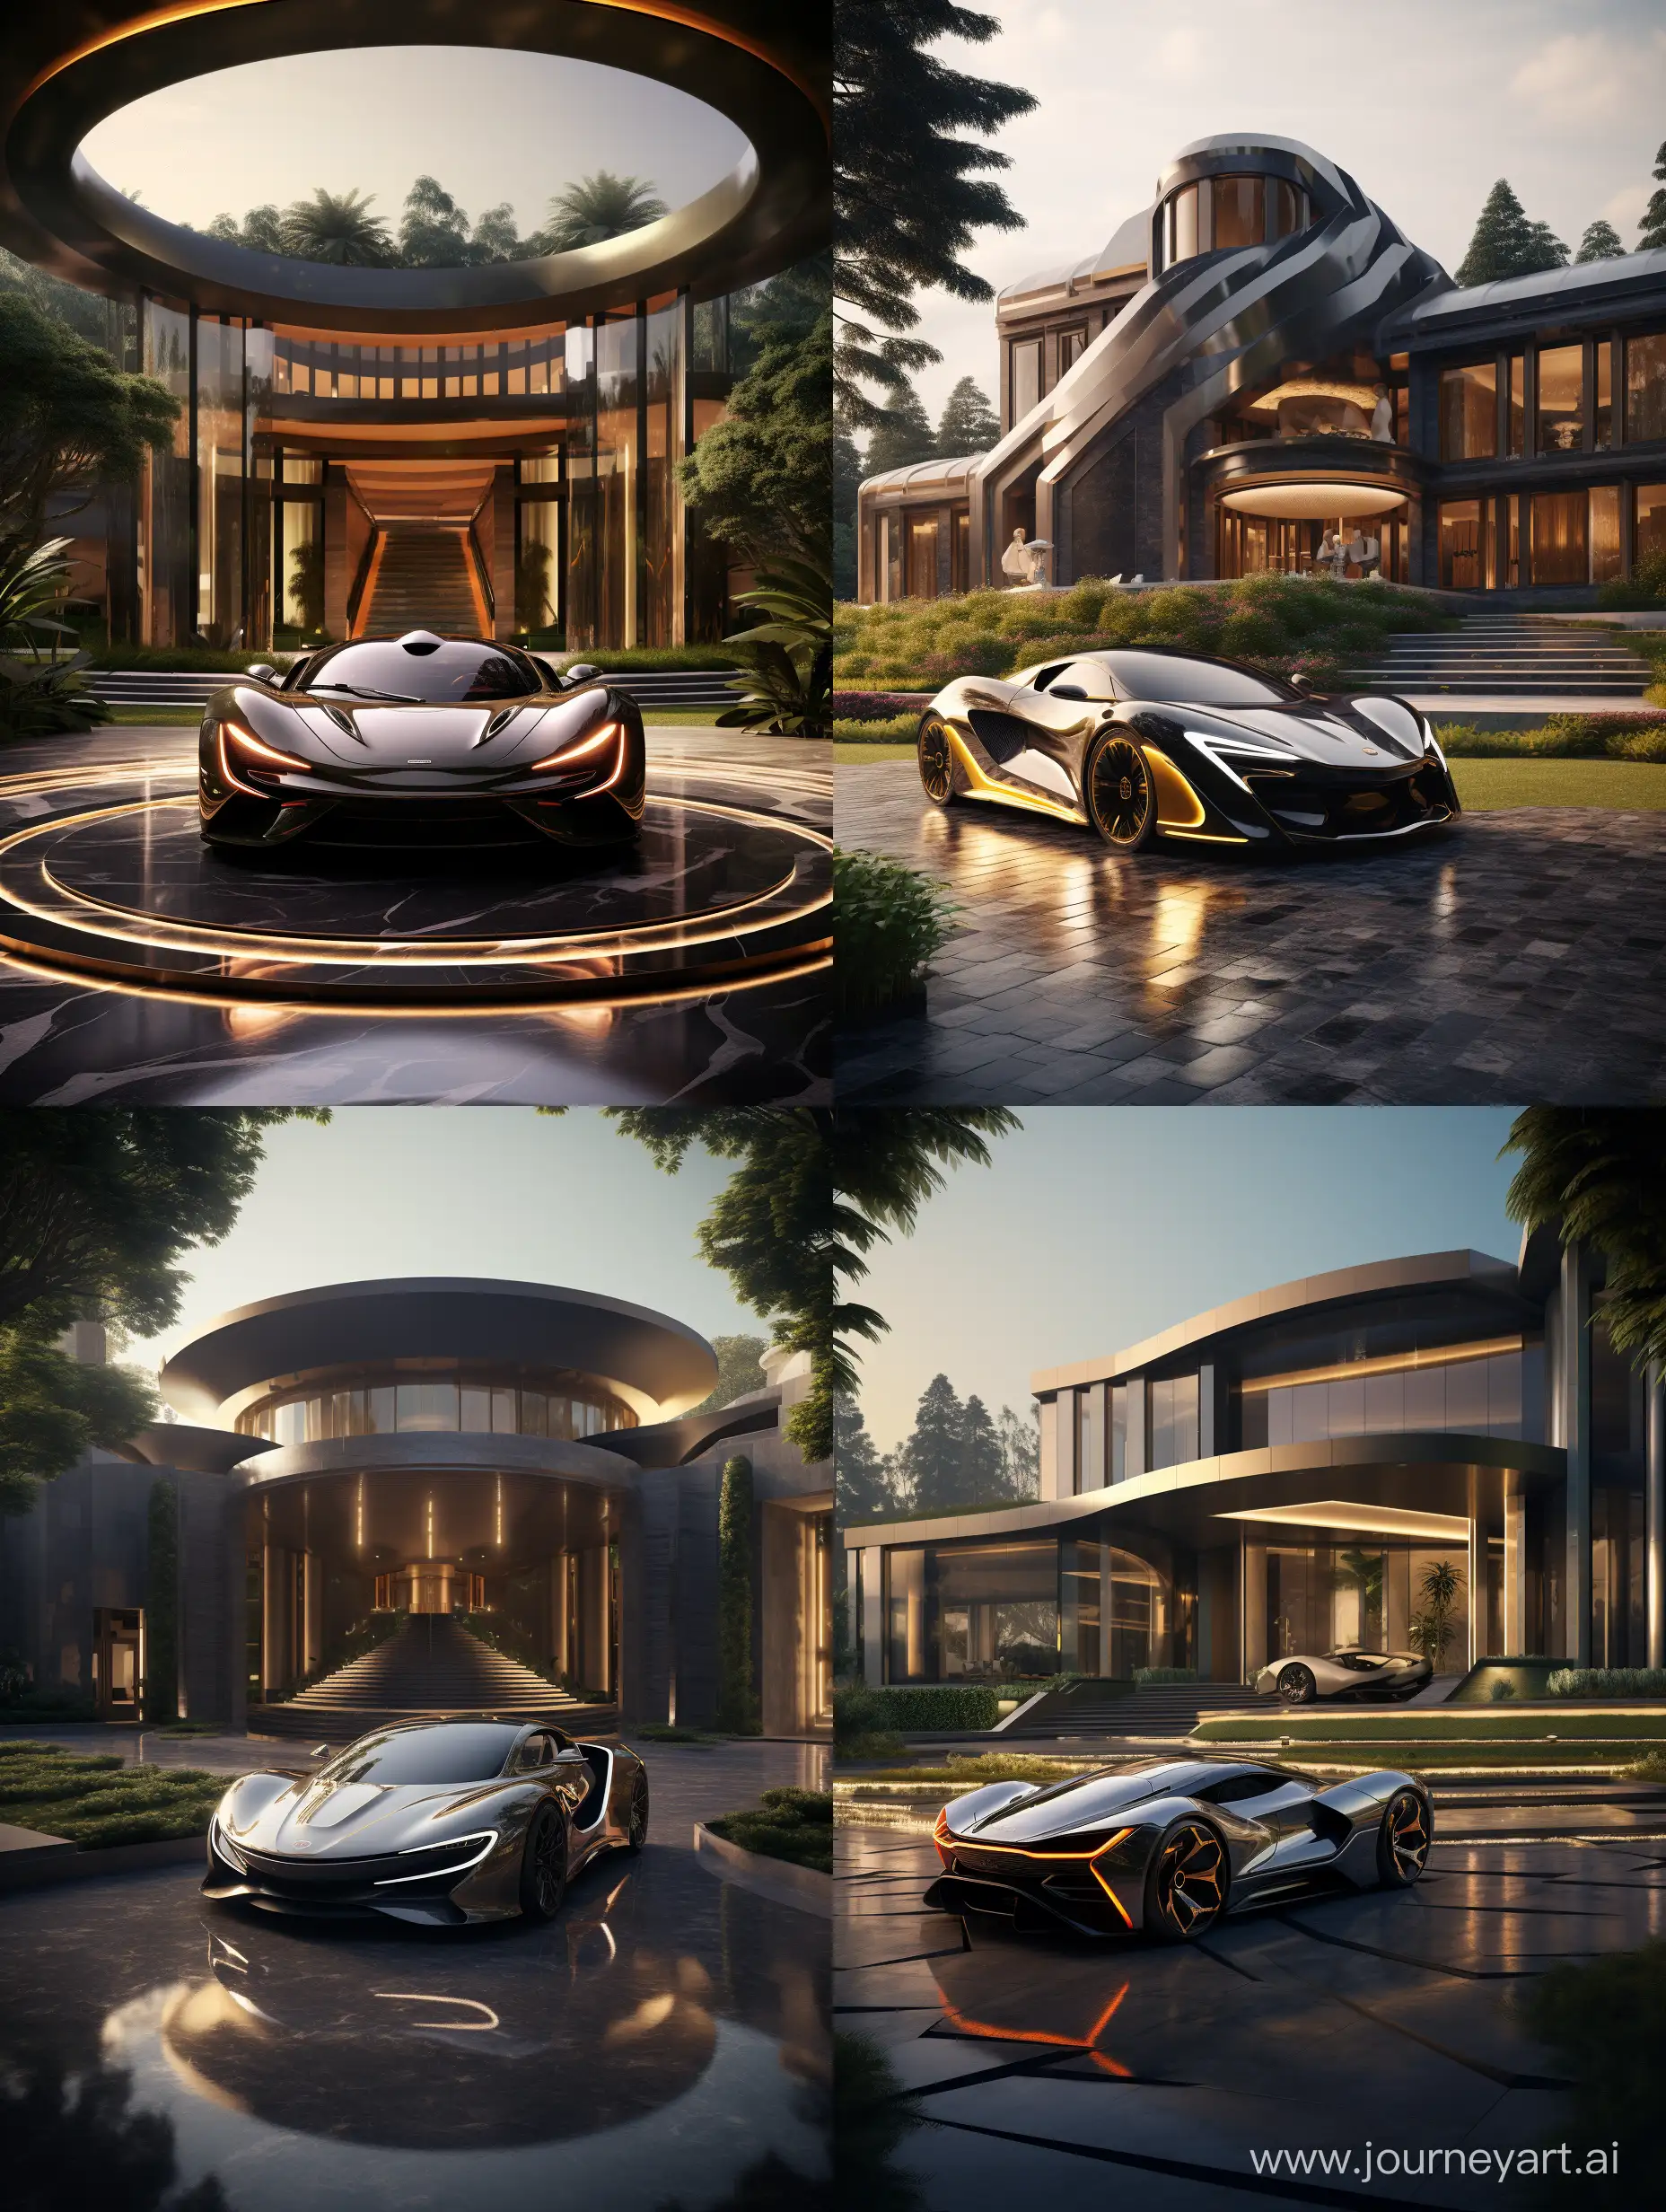 Explore the epitome of luxury in our McLaren- inspired mansion concept